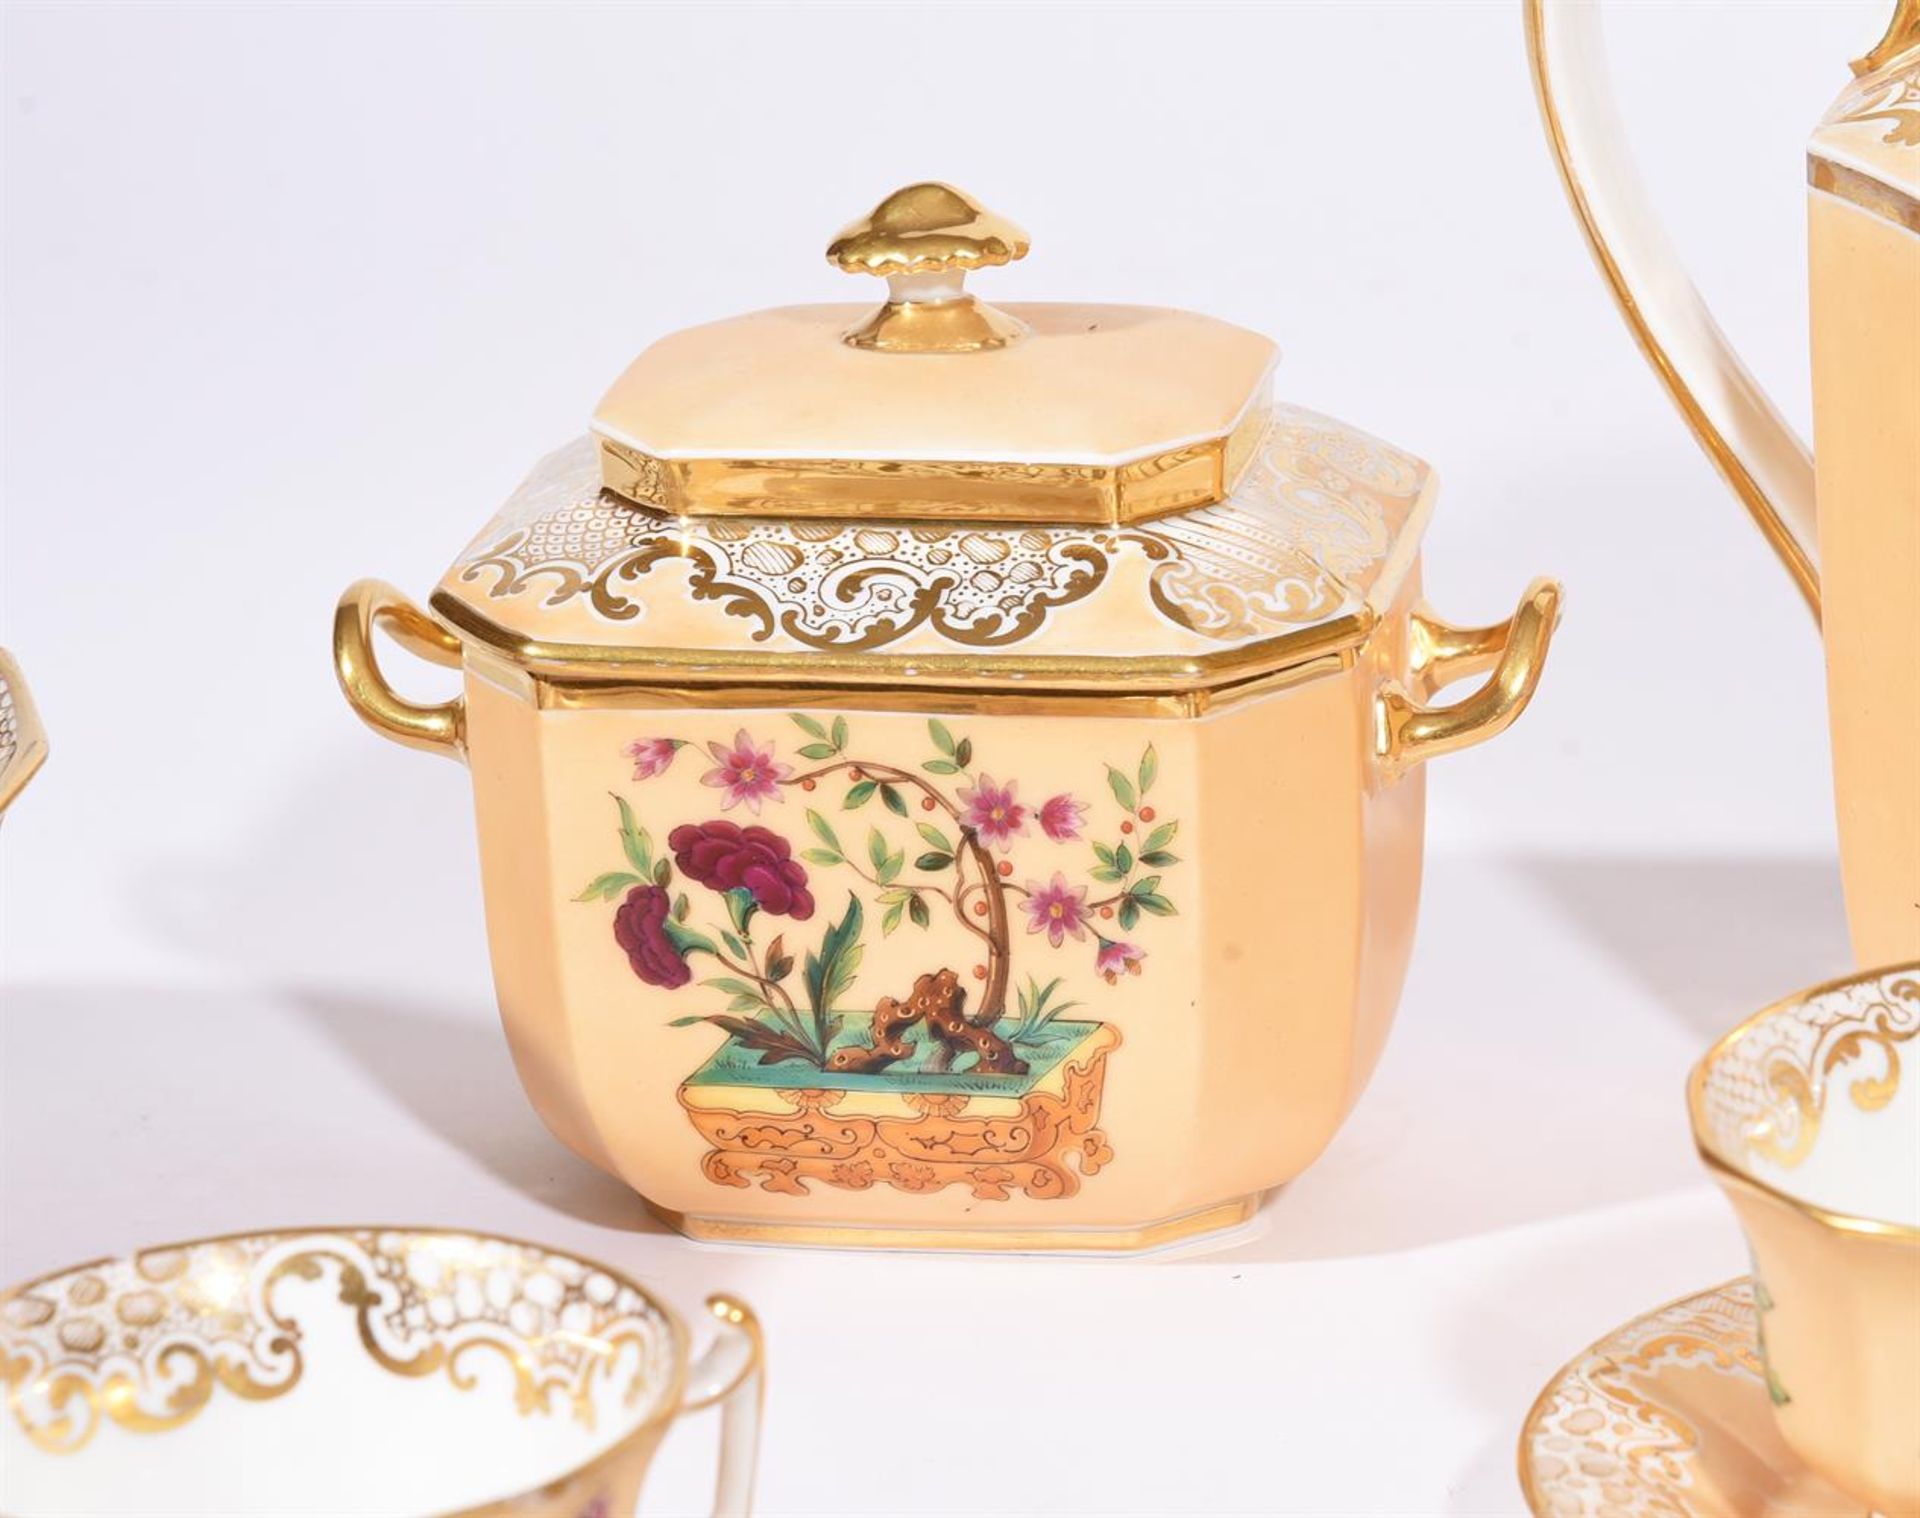 A FRENCH PORCELAIN CAFÉ AU LAIT GROUND PART TEA SERVICE MID 19TH CENTURYDecorated with chinoiserie - Image 3 of 3